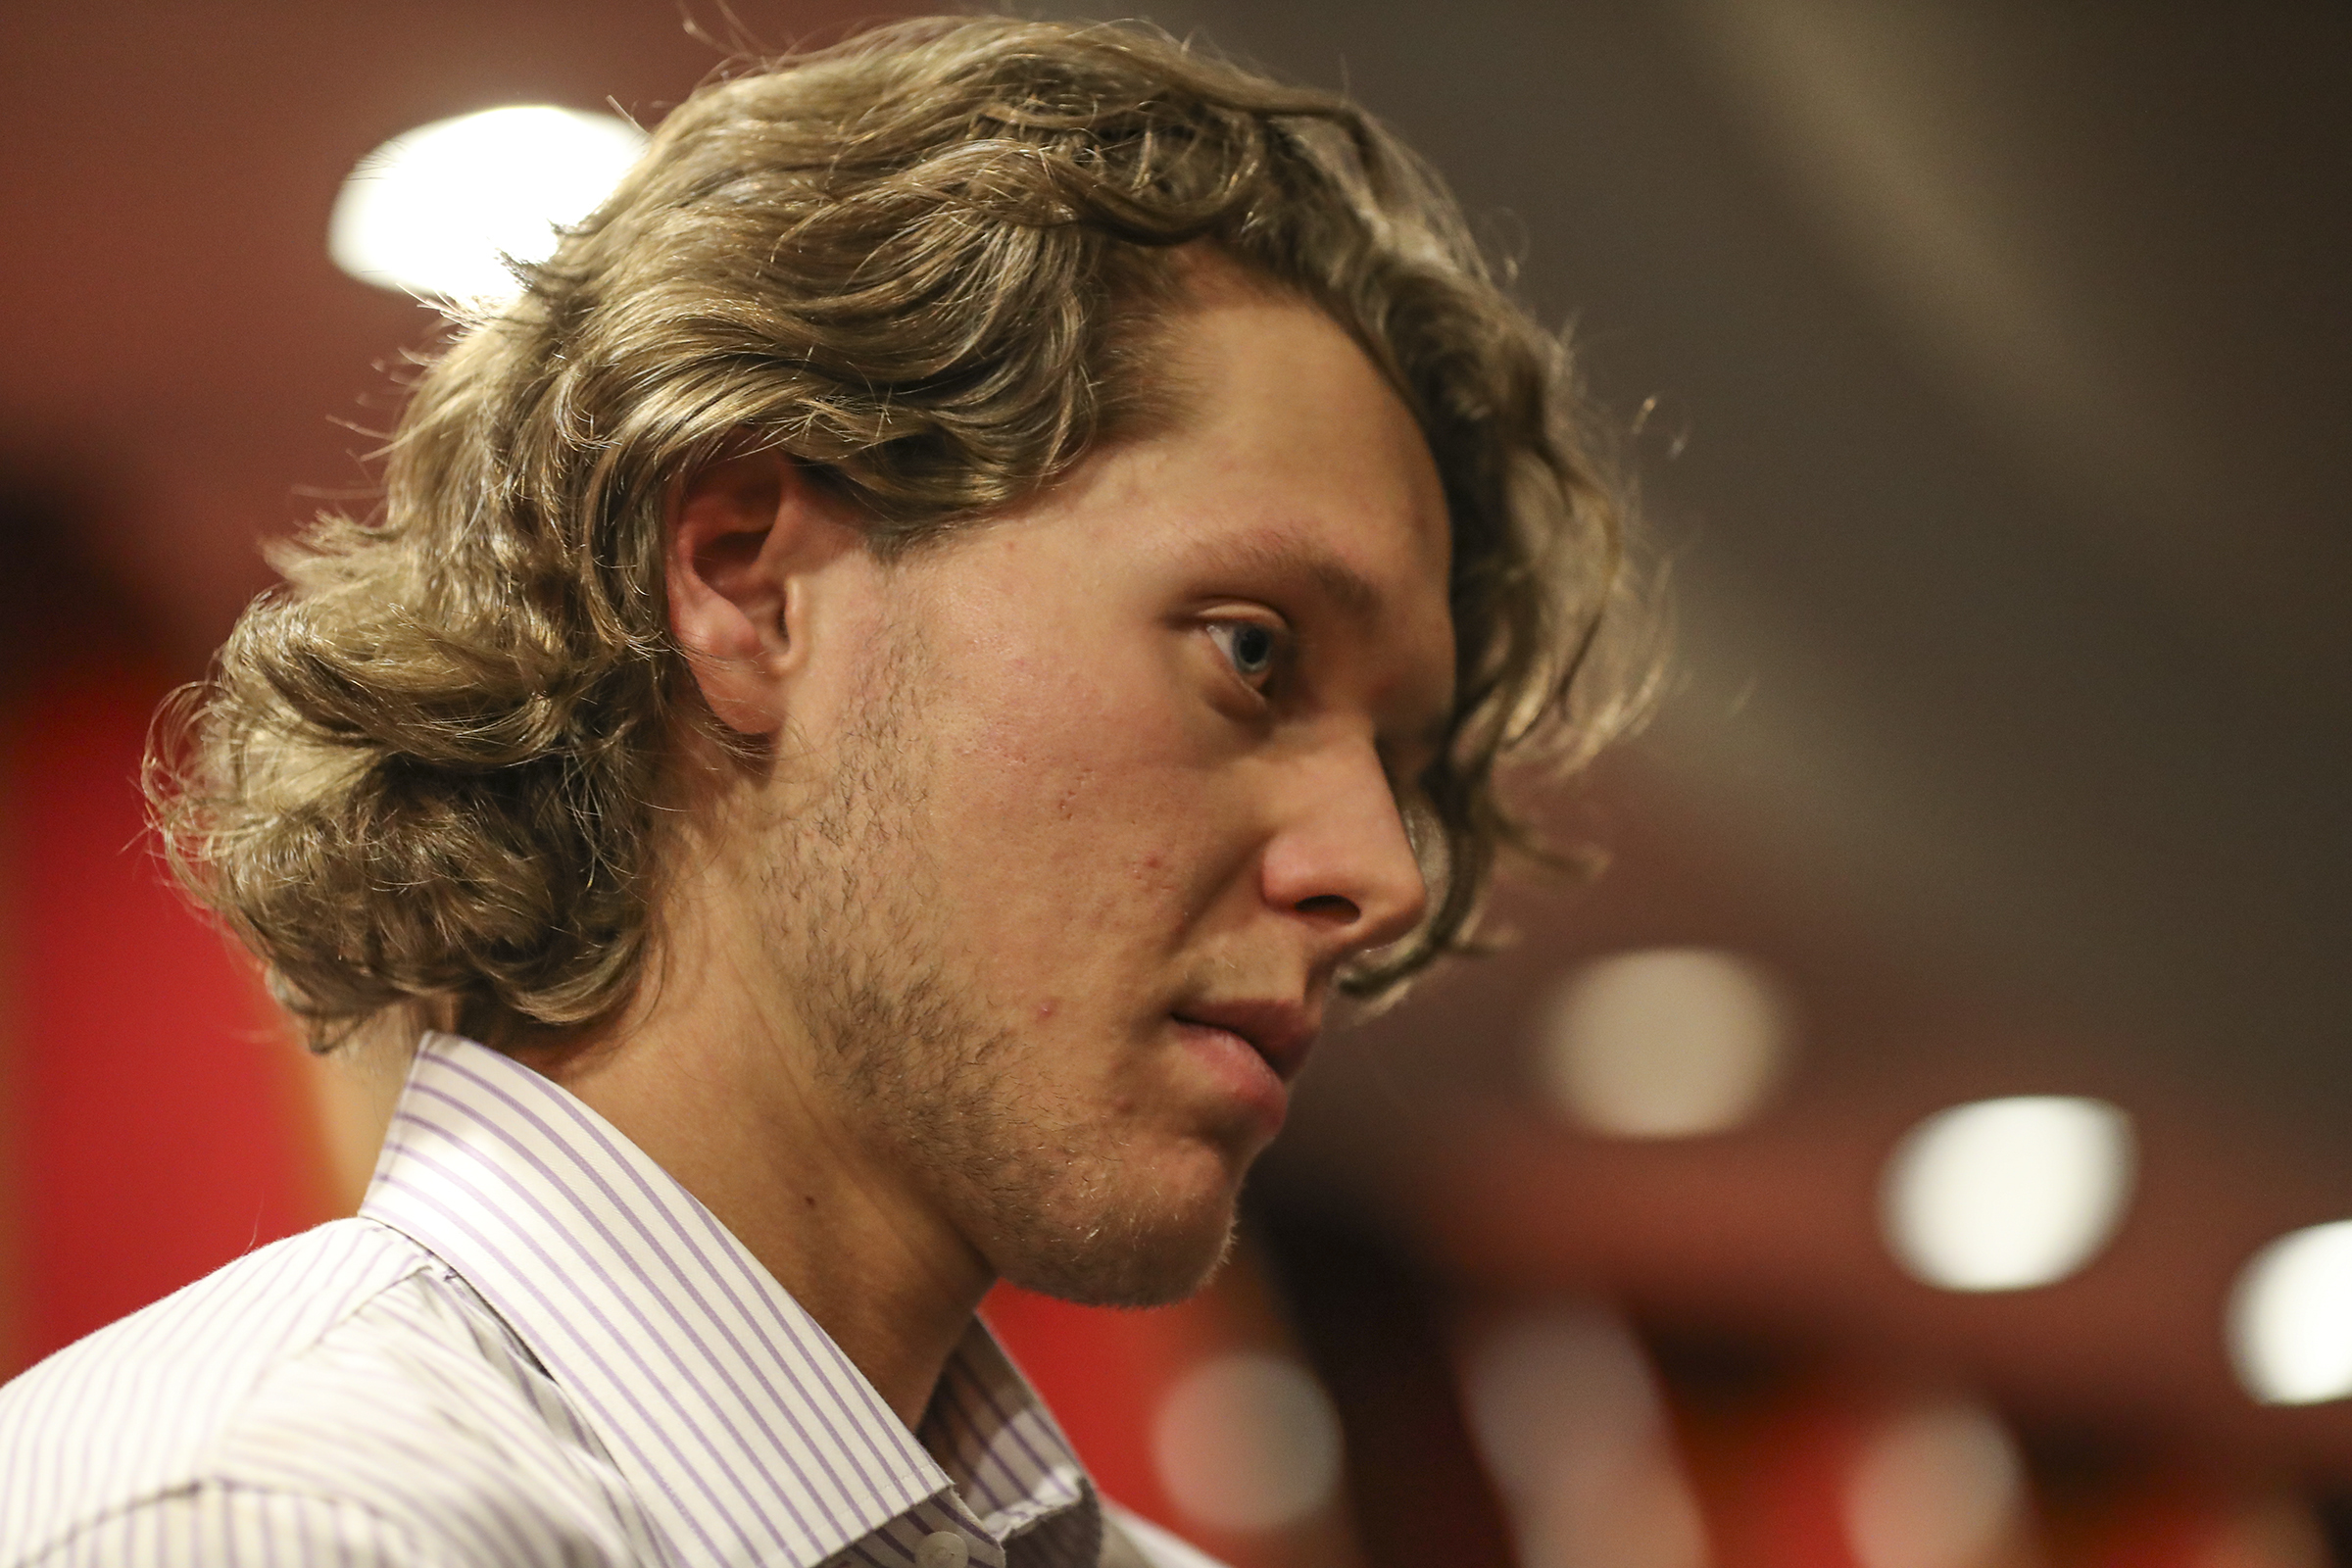 Can we talk about Alec Bohm's hair? : r/phillies